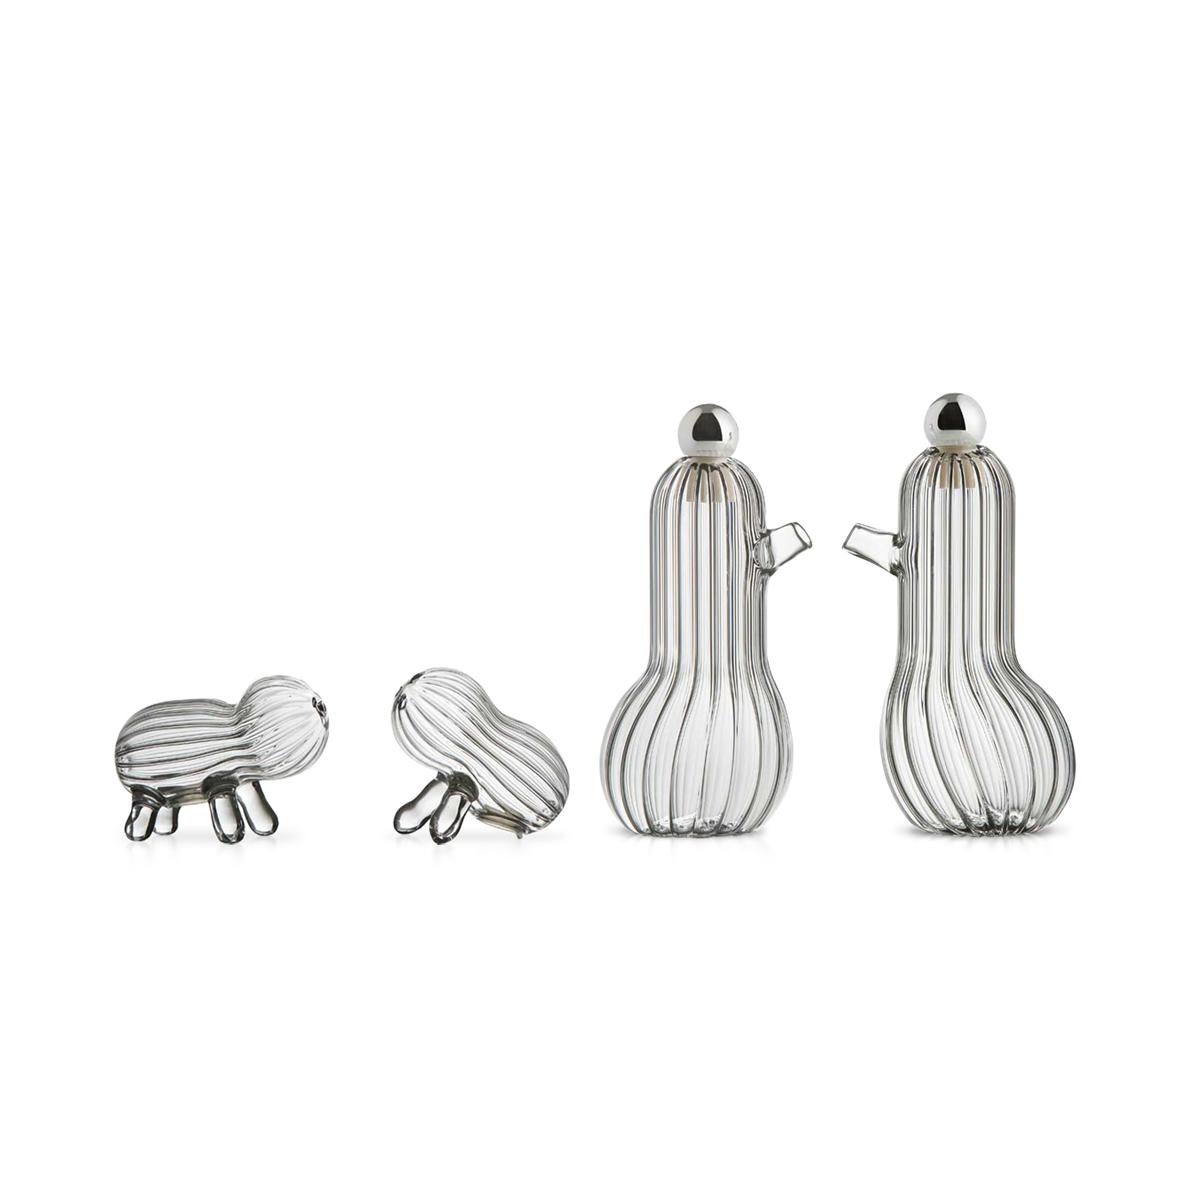 Tipì and Tidò are two small creatures that make up a salt and pepper set, this product is made in mouth blown glass with a grooved finishing. Tipì and Tidò set is part of Table Joy, a collection designed by Matteo Cibic whose items are a family of